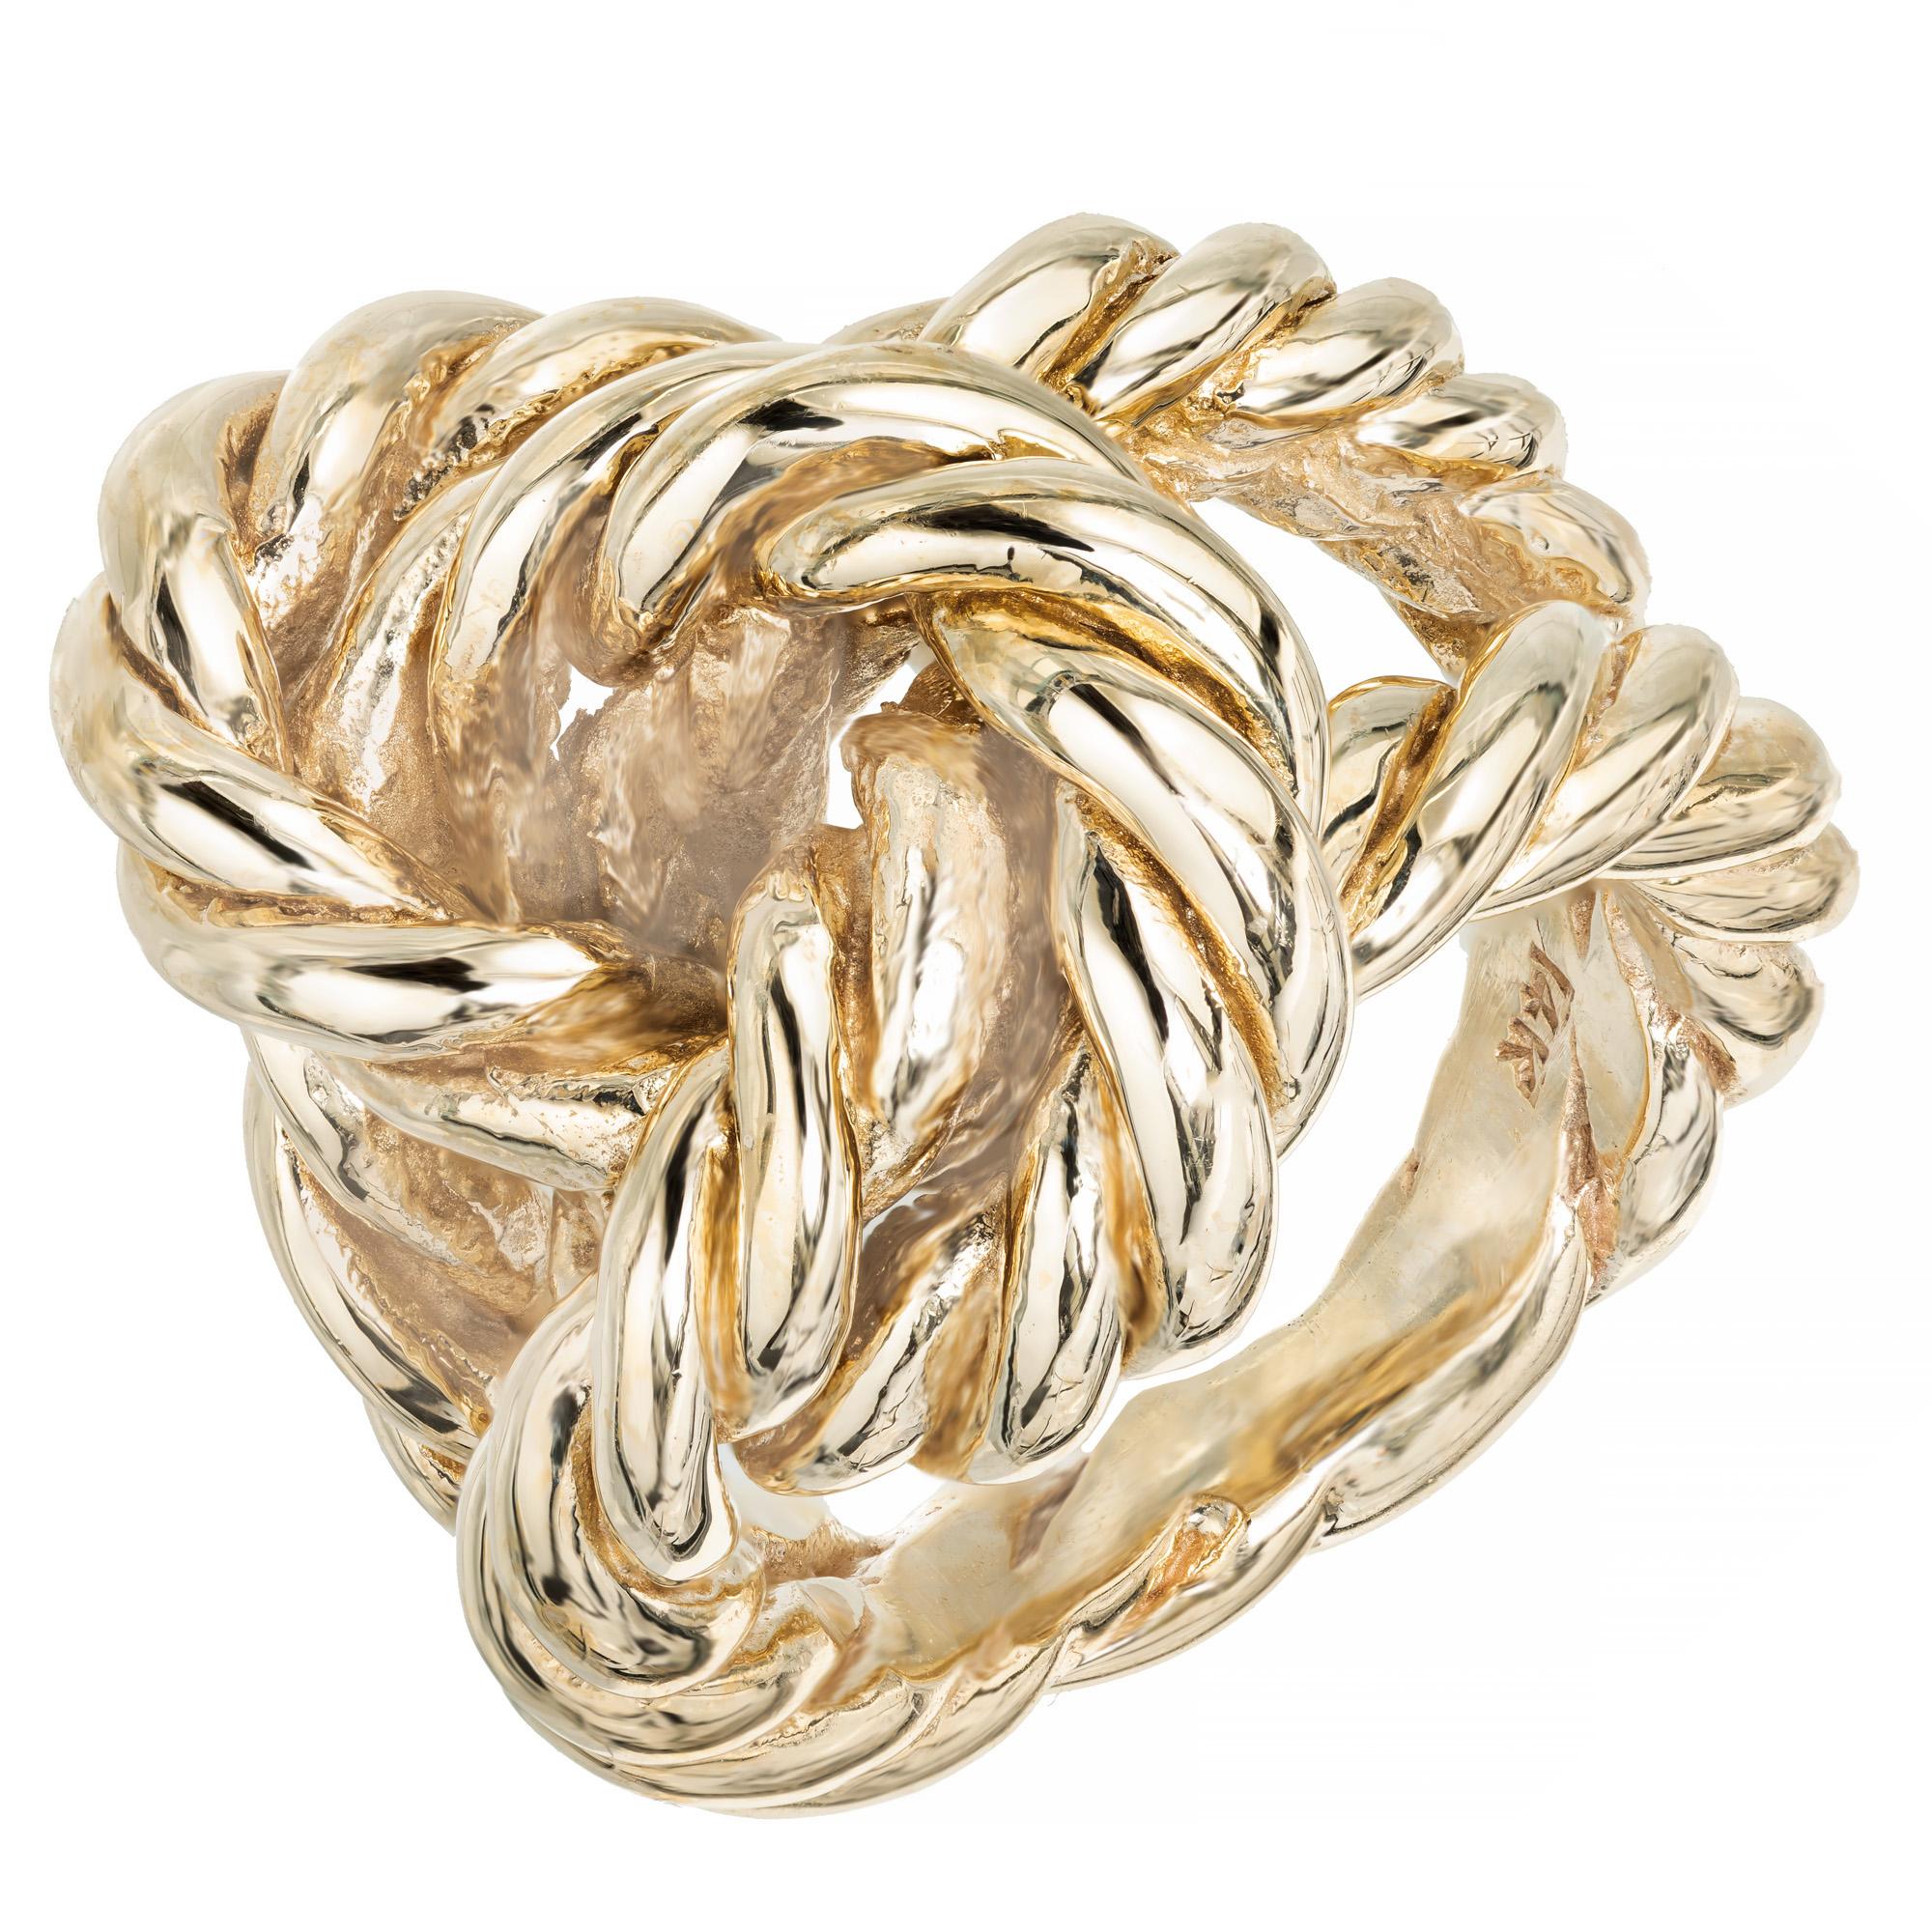 Heavy solid 3 dimensional 1950s knot cocktail ring. Twisted rope 14k yellow gold.

Size 5.5 and not easily sizable
14k yellow gold 
23.4 grams
Tested and Stamped: 14k
Width at top: 15.2  
Width at bottom: 4.30 
